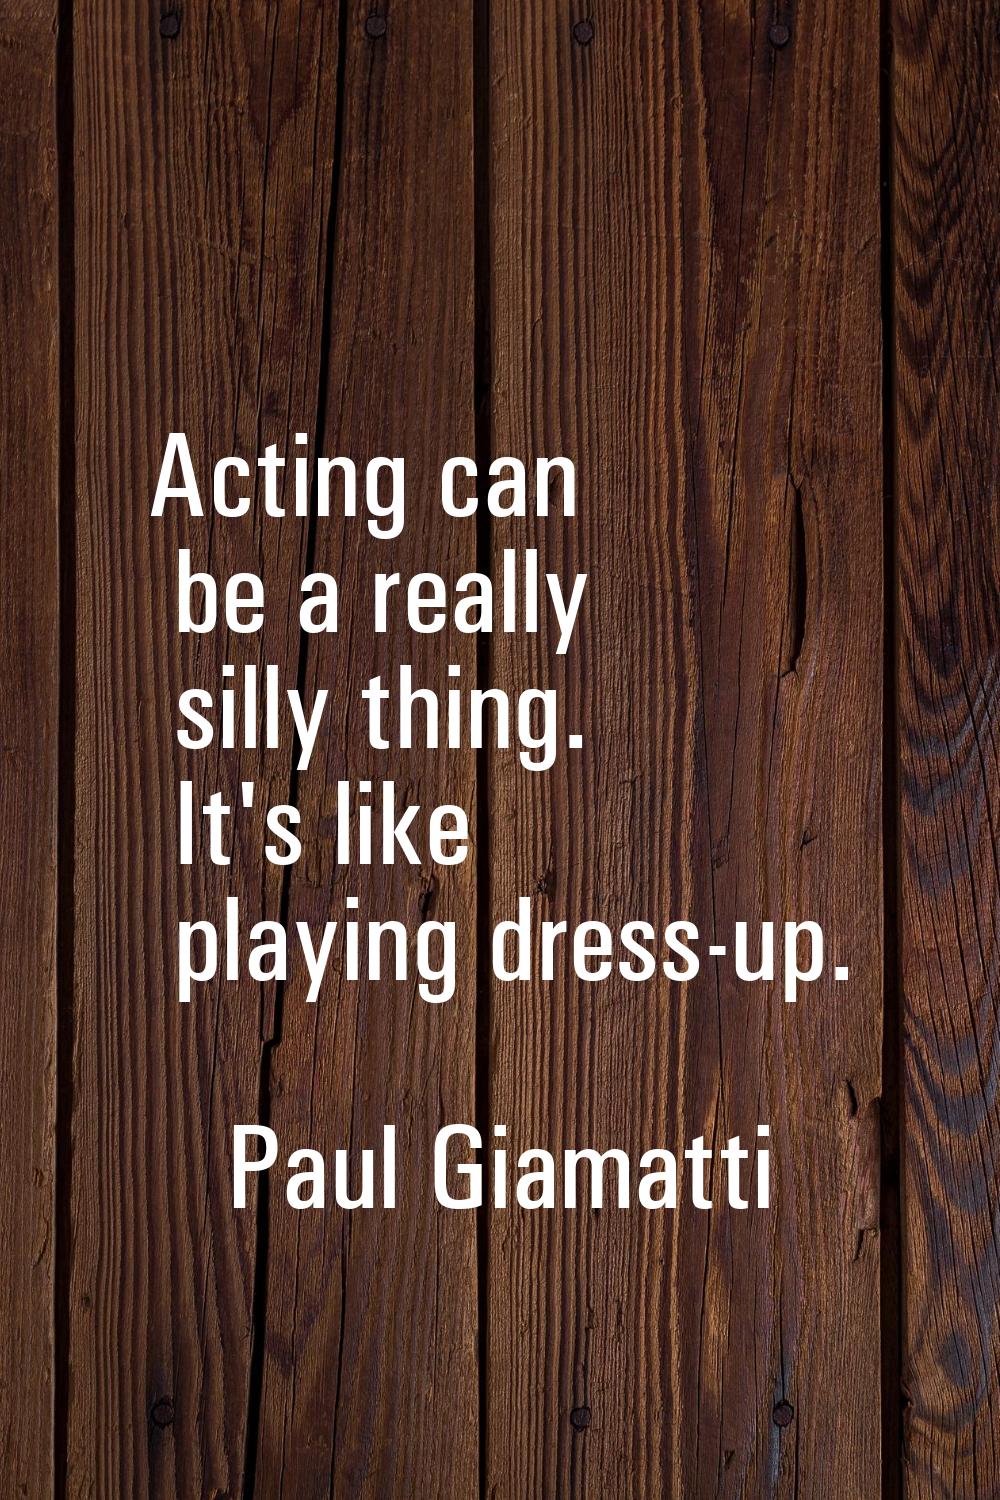 Acting can be a really silly thing. It's like playing dress-up.